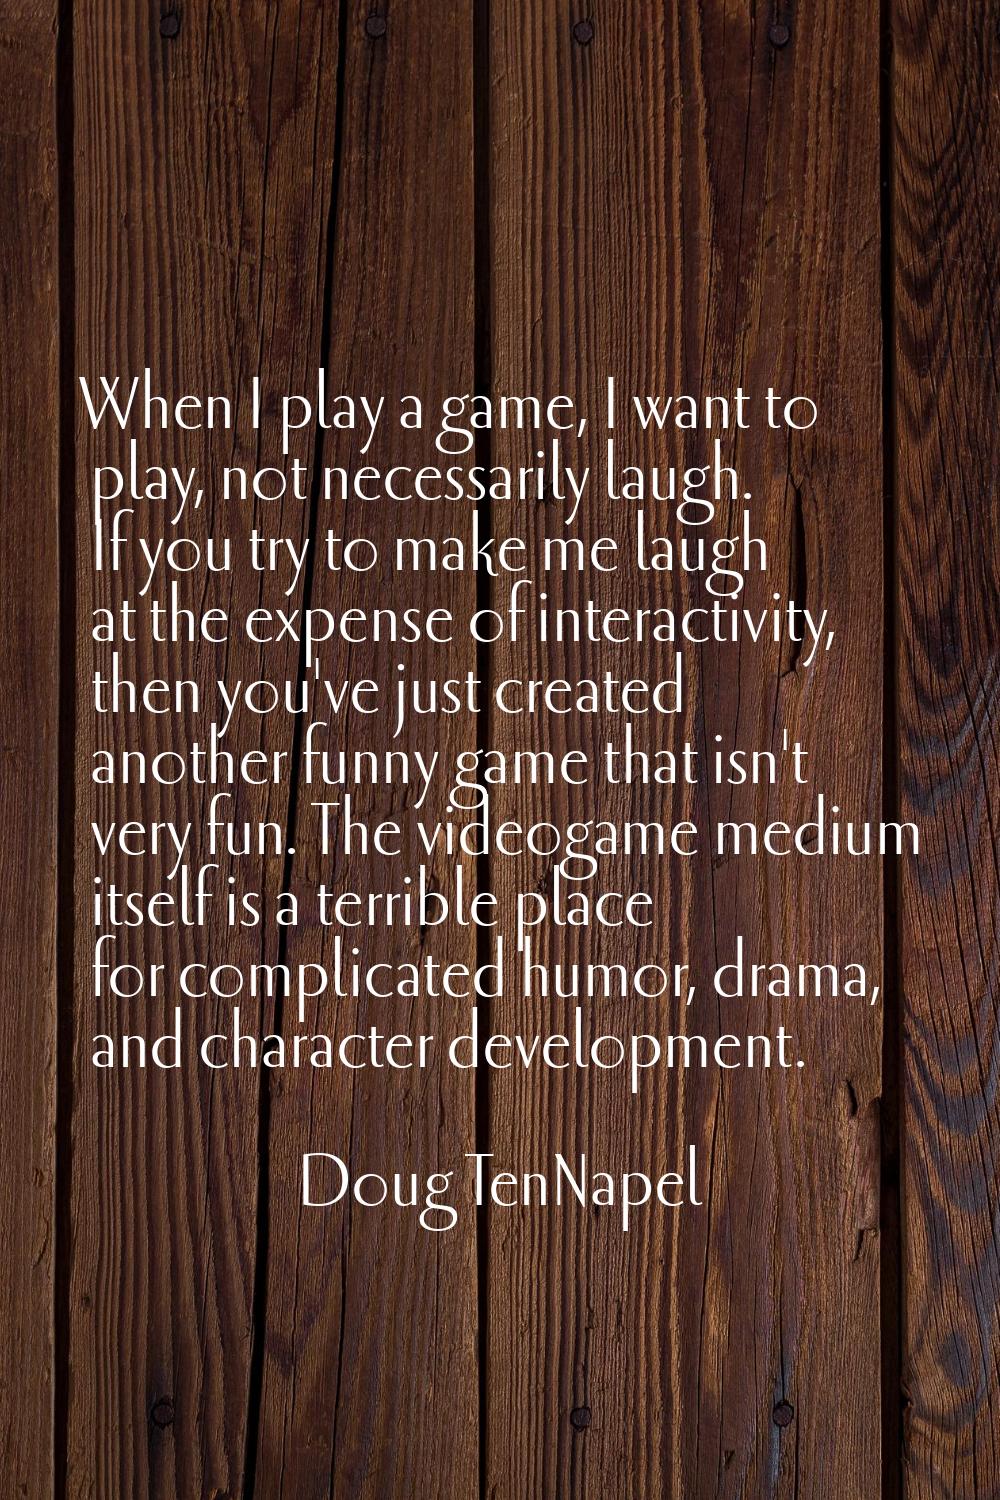 When I play a game, I want to play, not necessarily laugh. If you try to make me laugh at the expen